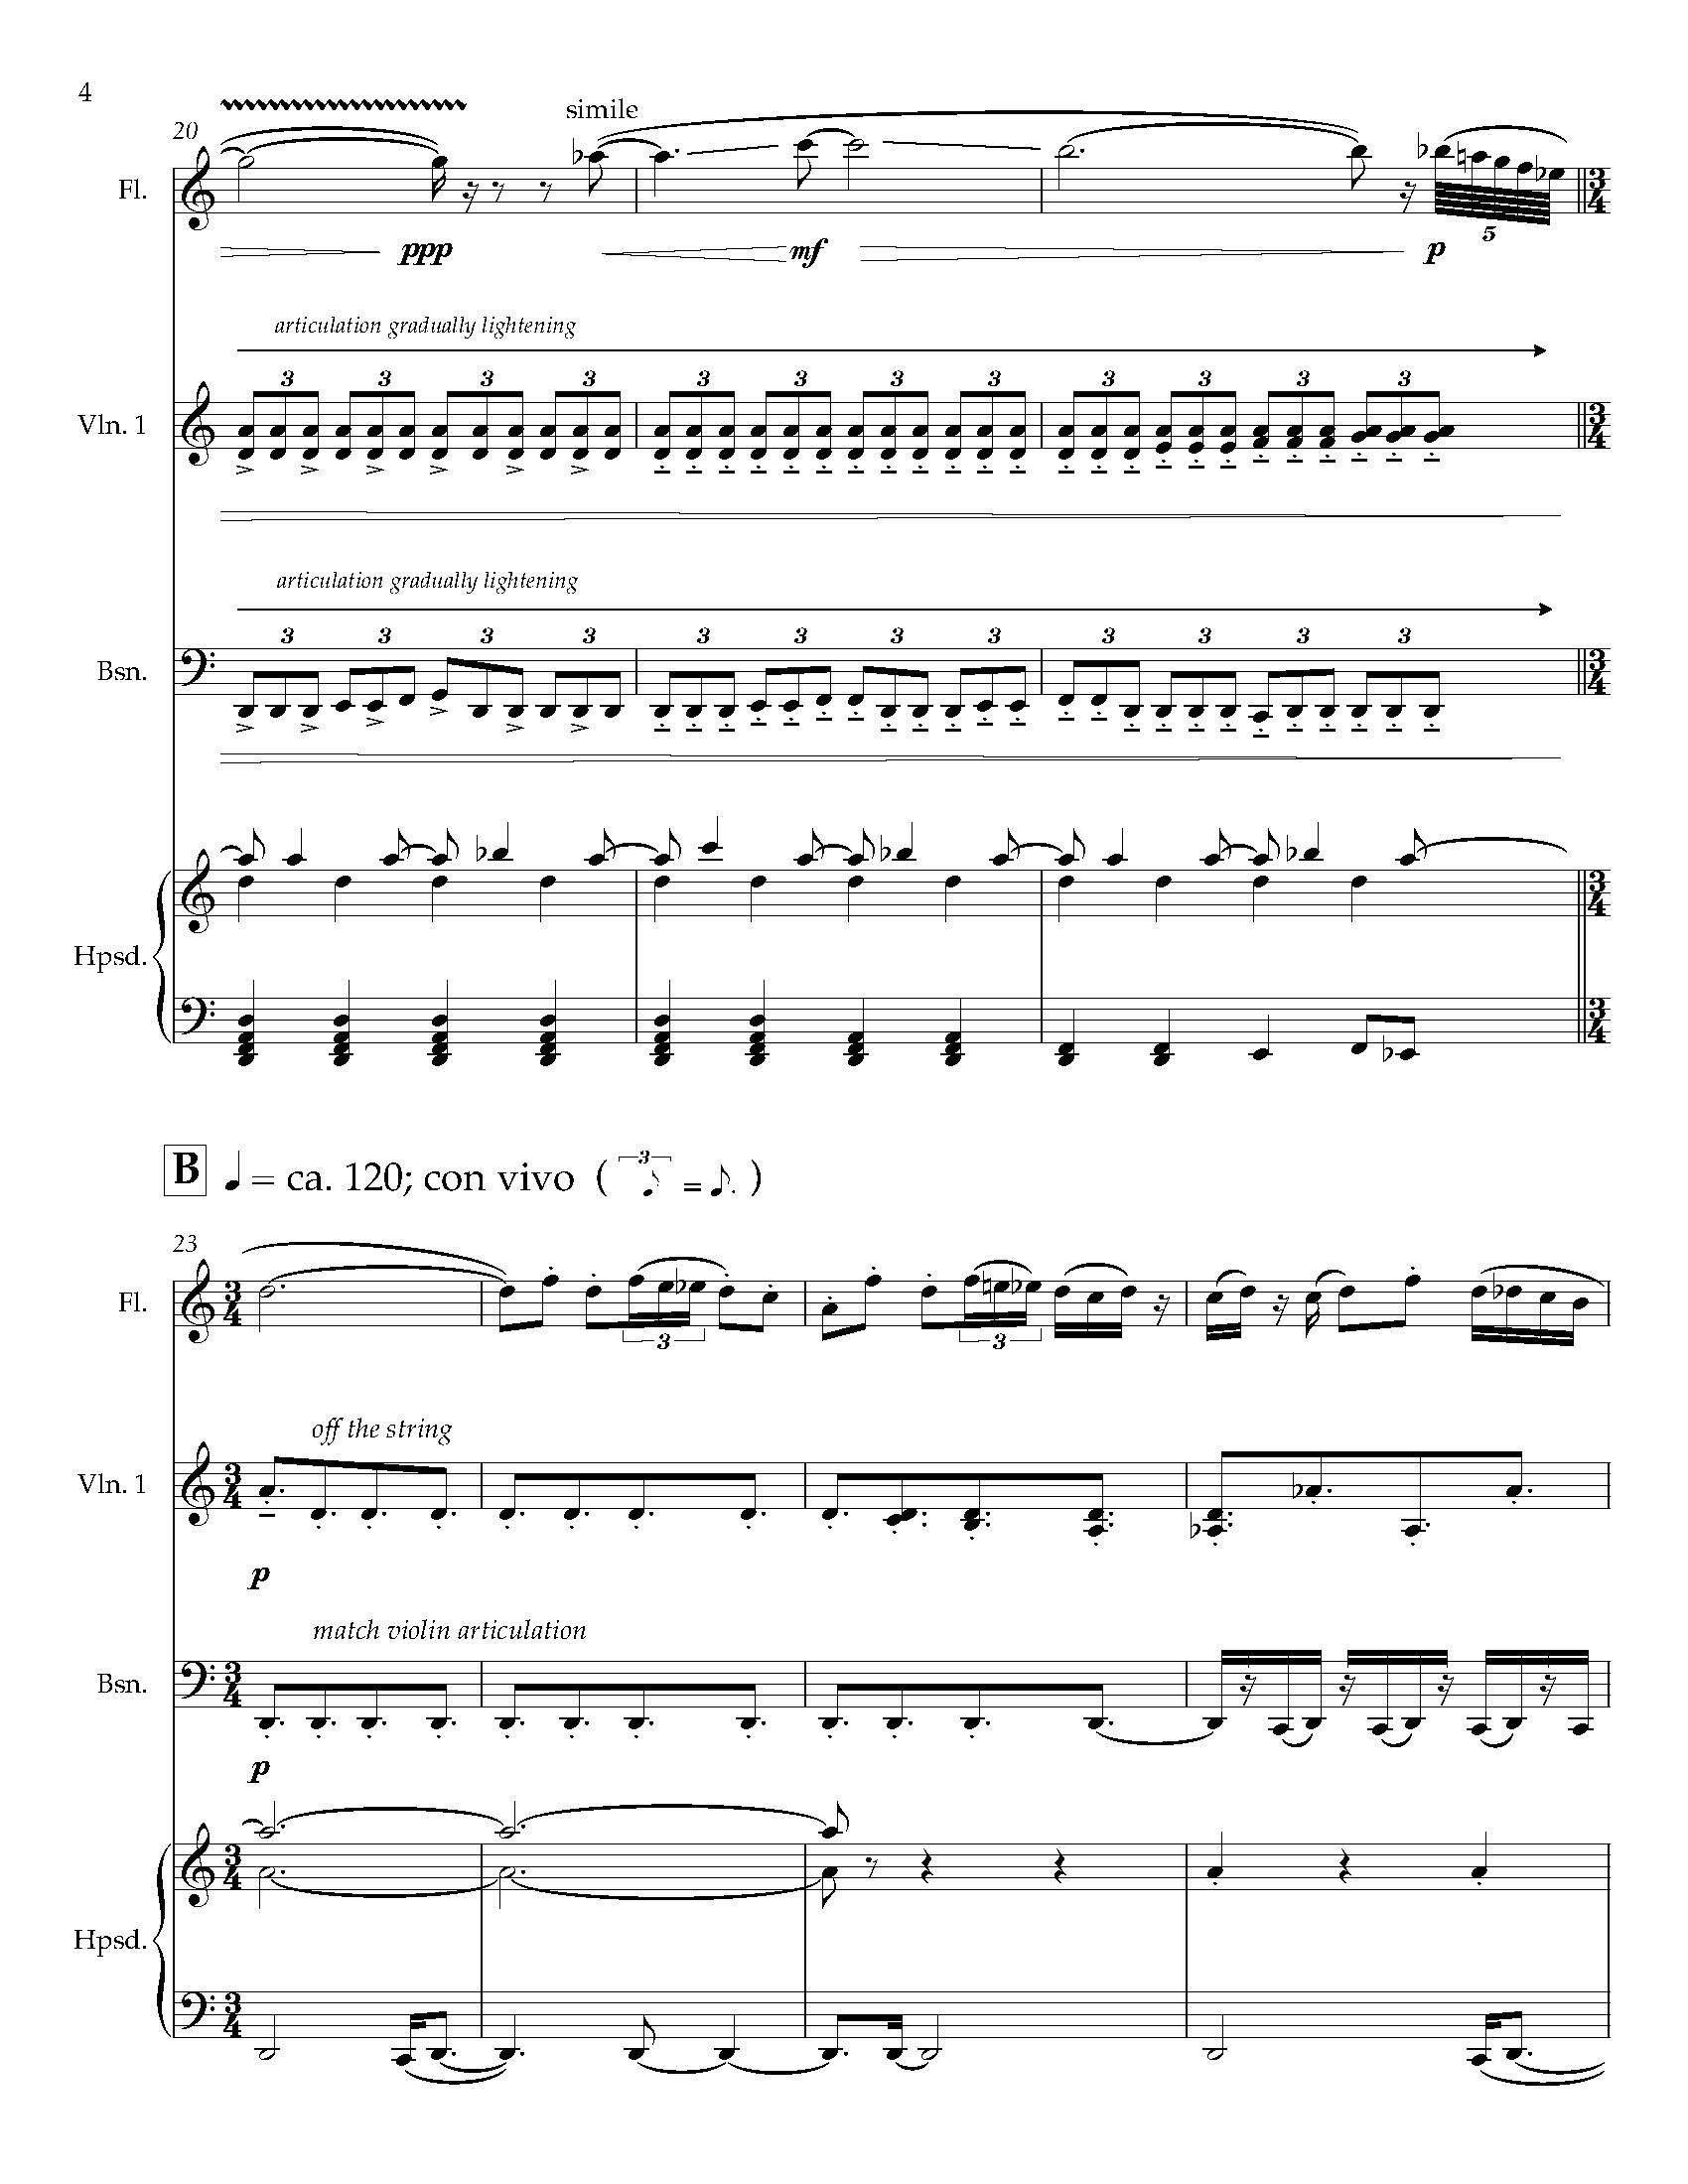 The Hourglass Equation - Complete Score_Page_10.jpg